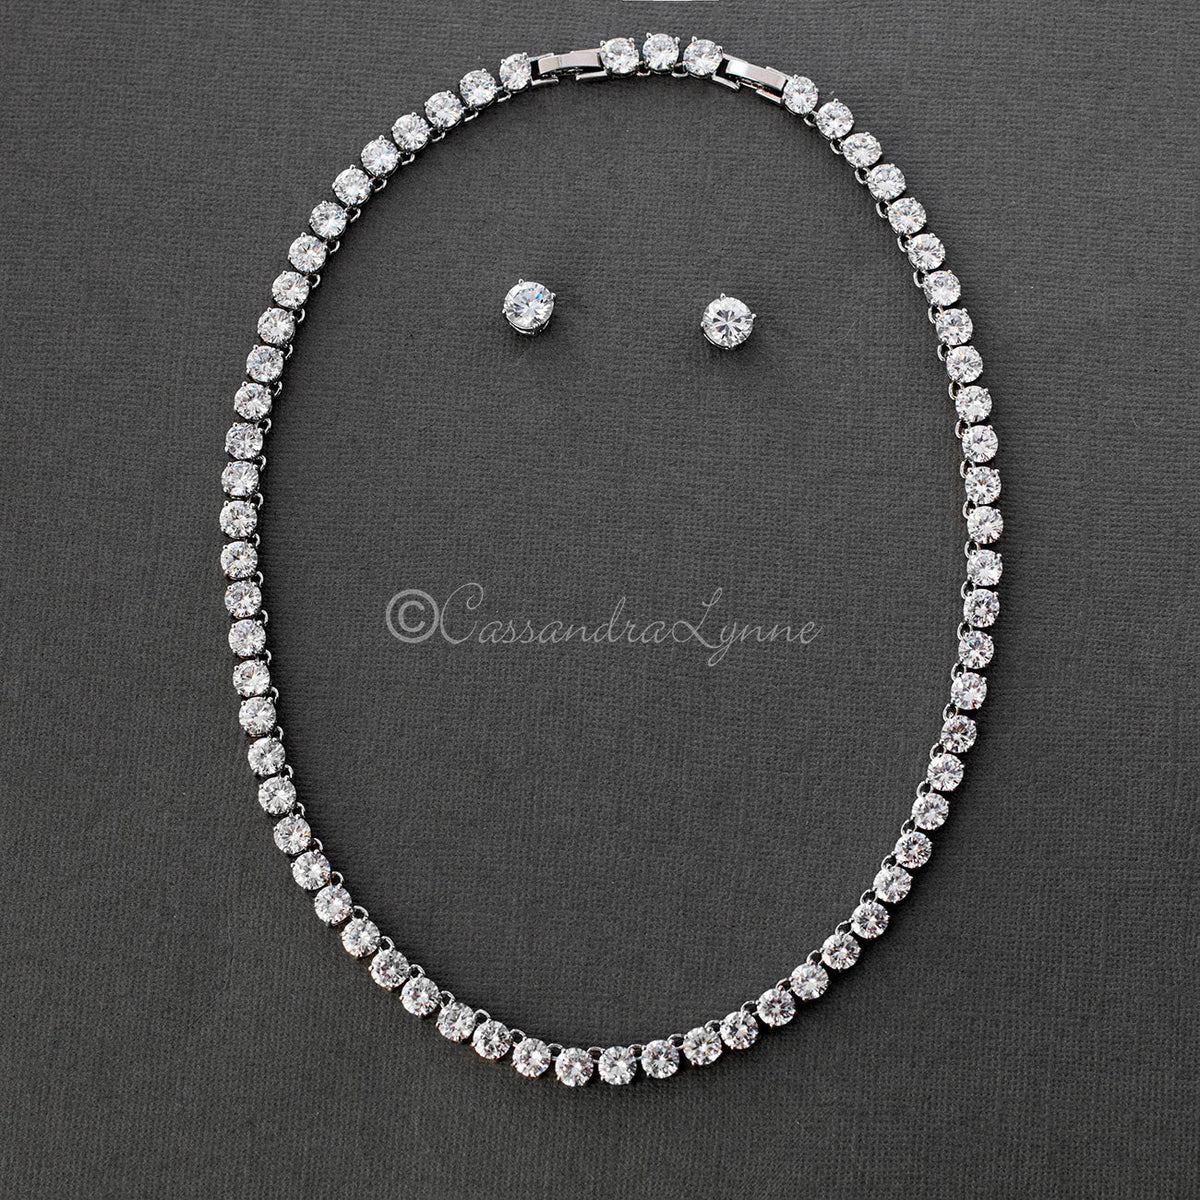 Cubic Zirconia Tennis Necklace and Earrings - Cassandra Lynne